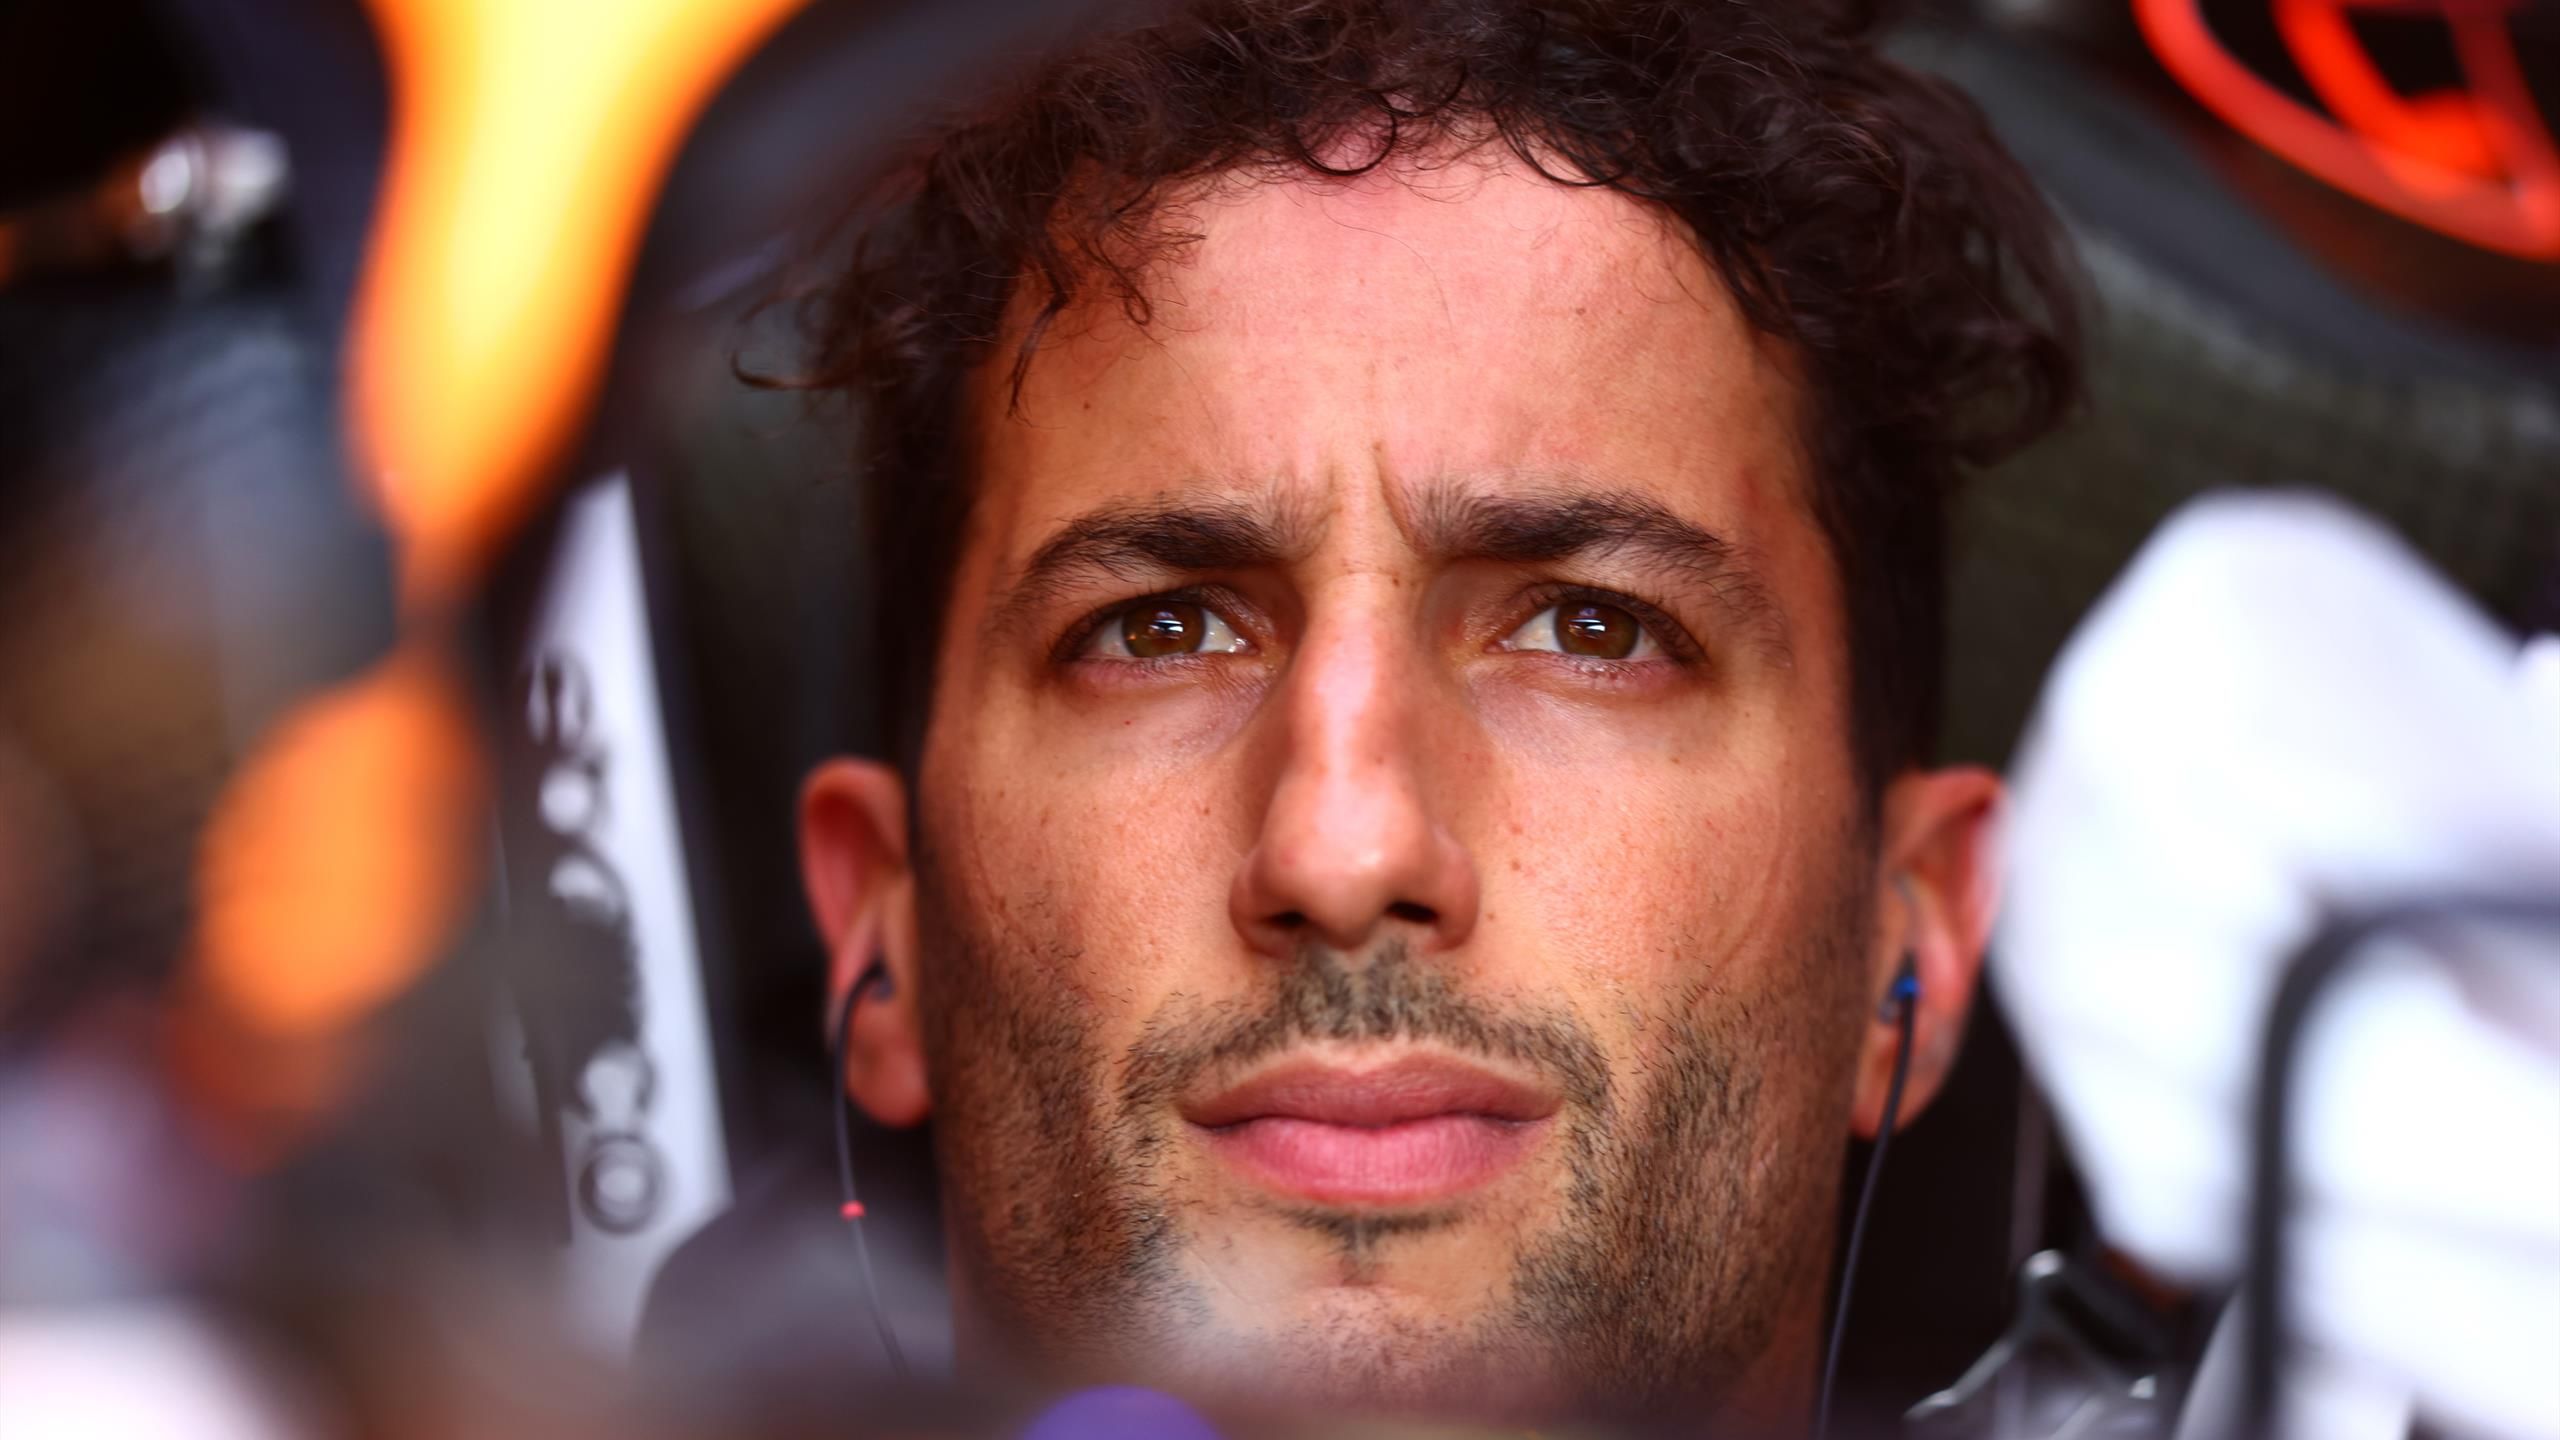 Daniel Ricciardo at an 'advanced stage of discussions' to join Mercedes ...